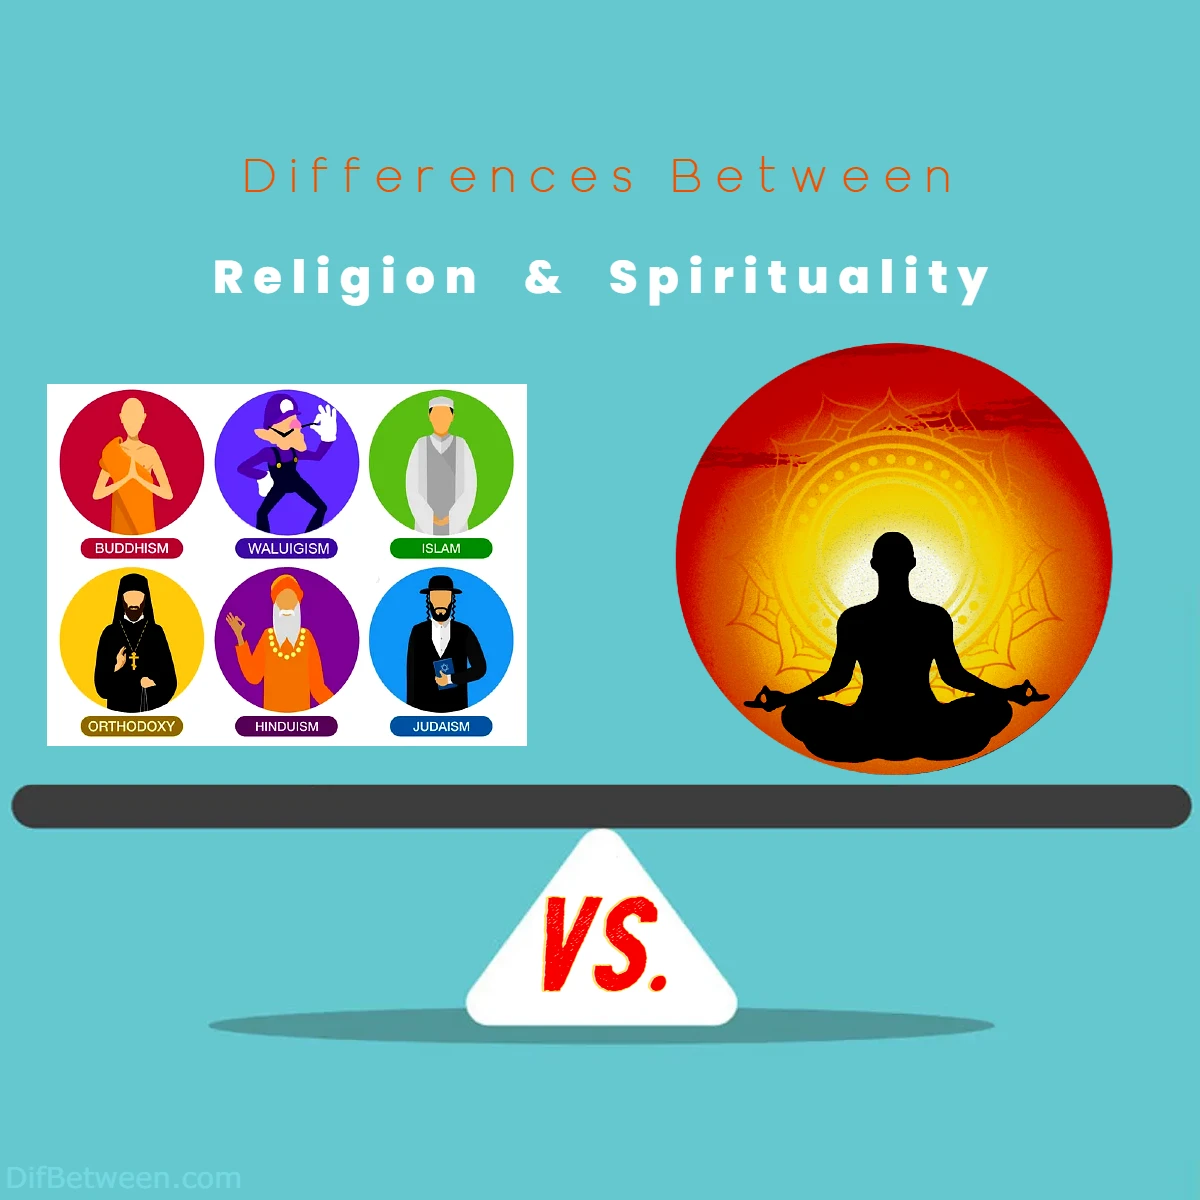 Differences Between Religion vs Spirituality